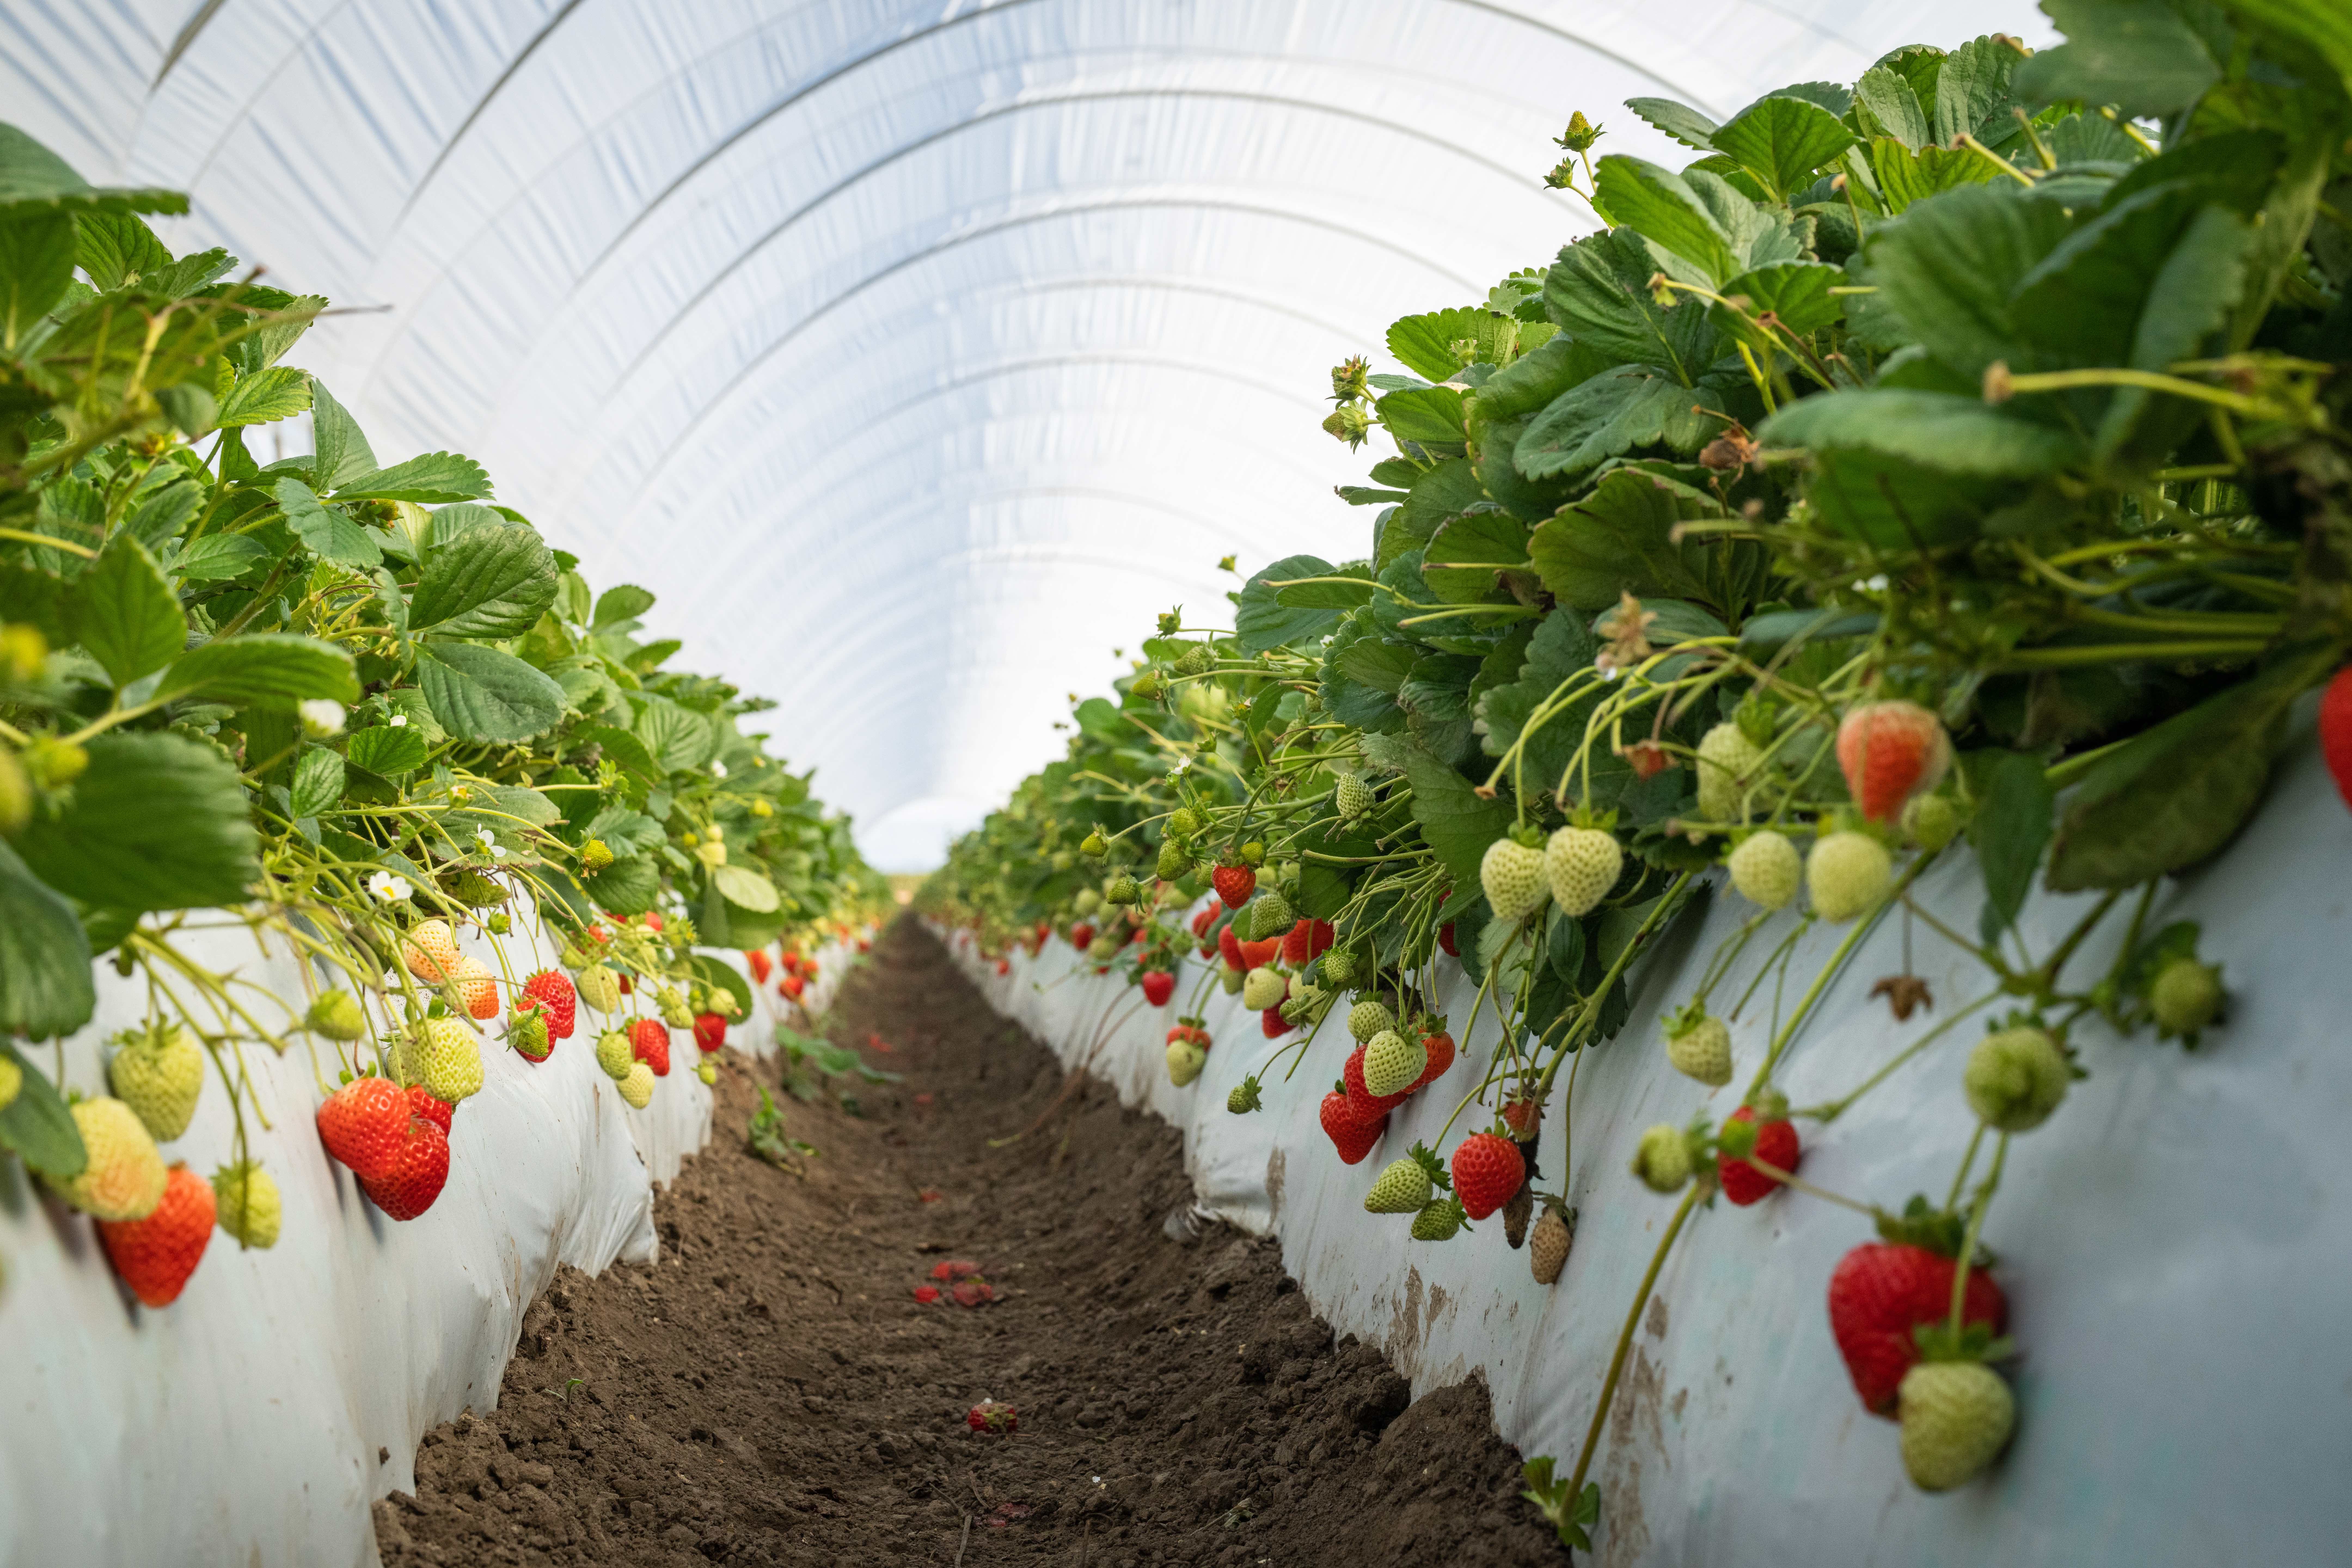 UC Davis "Eclipse" strawberries shown growing in rows inside a greenhouse in Santa Maria, CA. 